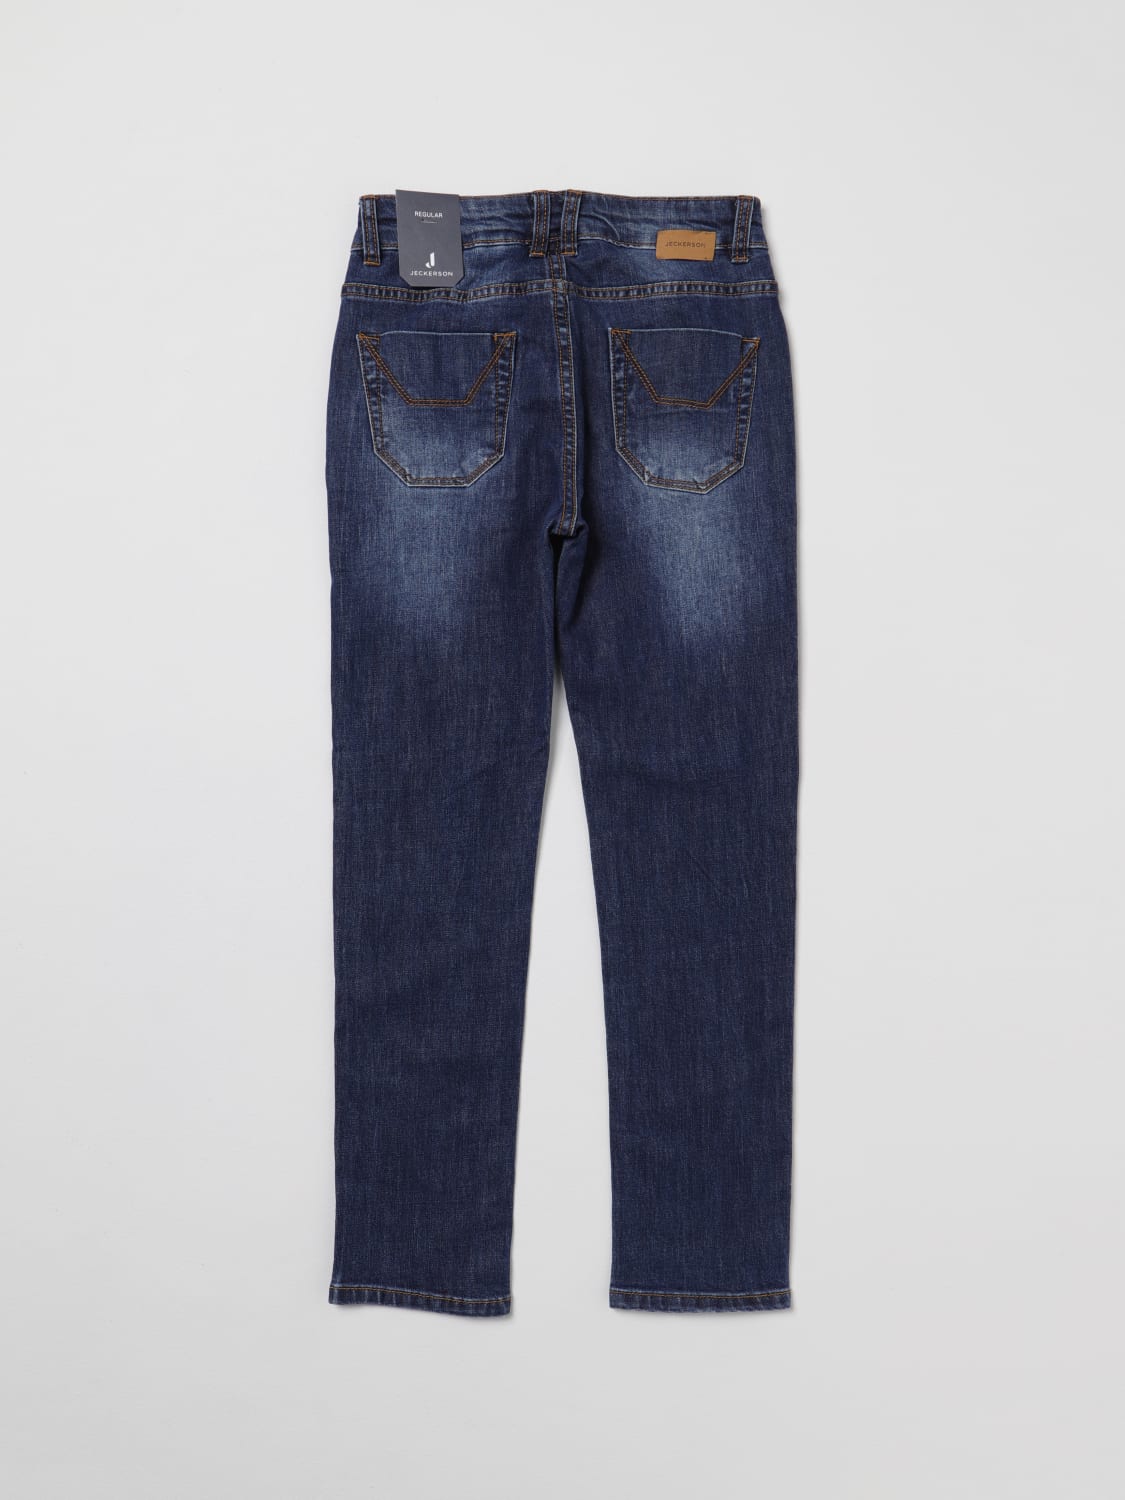 Jeckerson jeans for boys